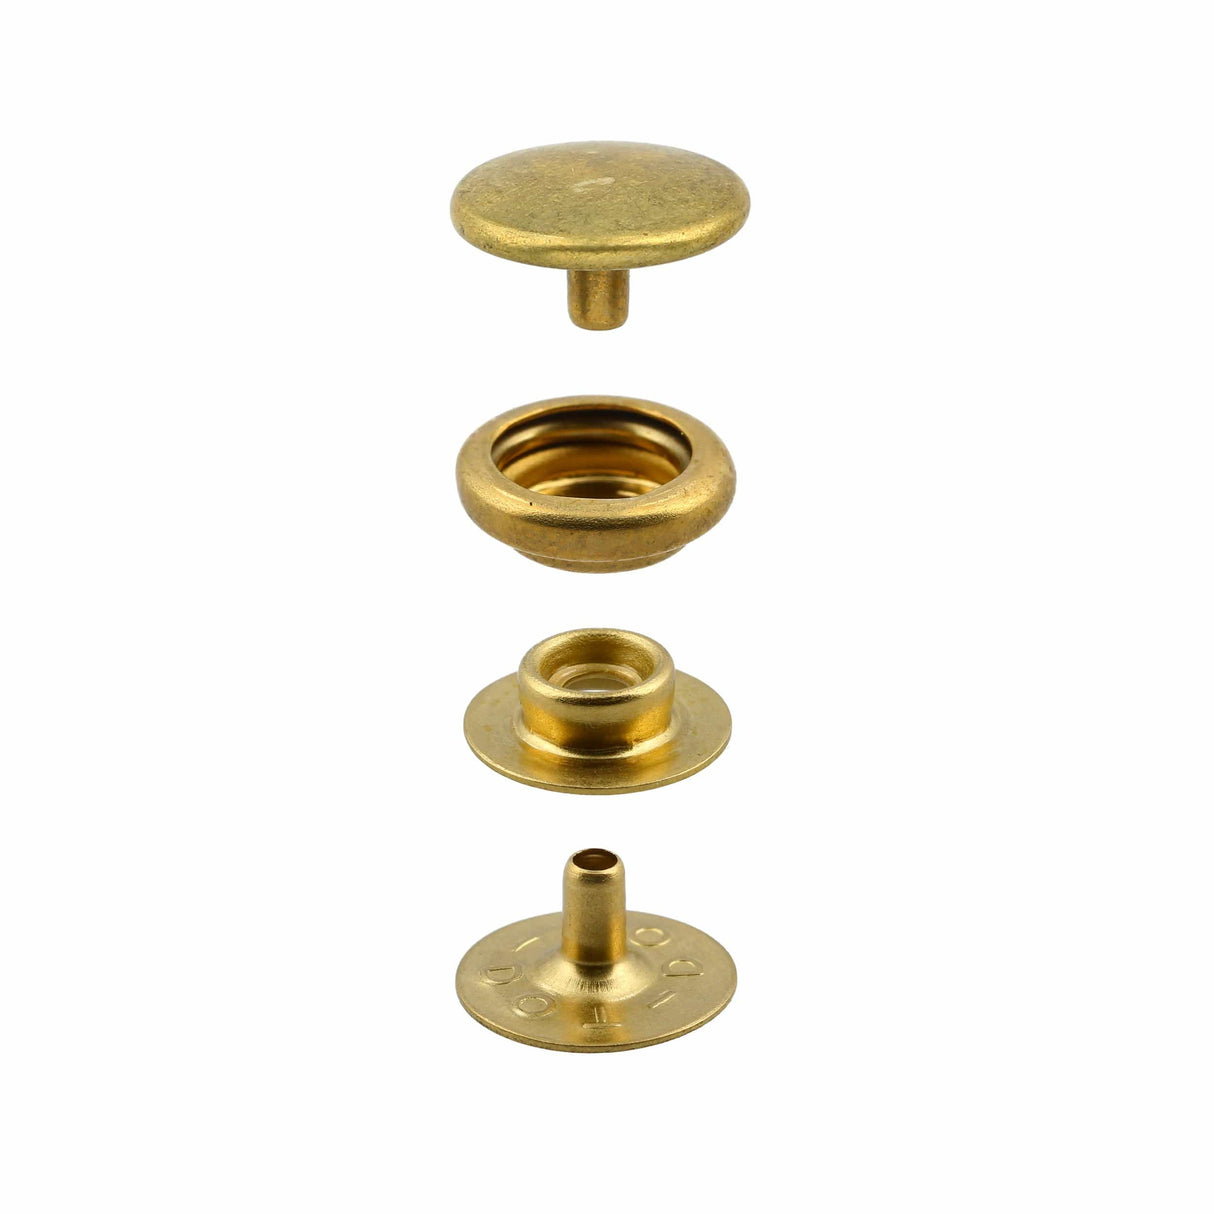 Swivel Bolt Snap Solid Brass 1 1/4 – OA Leather Supply